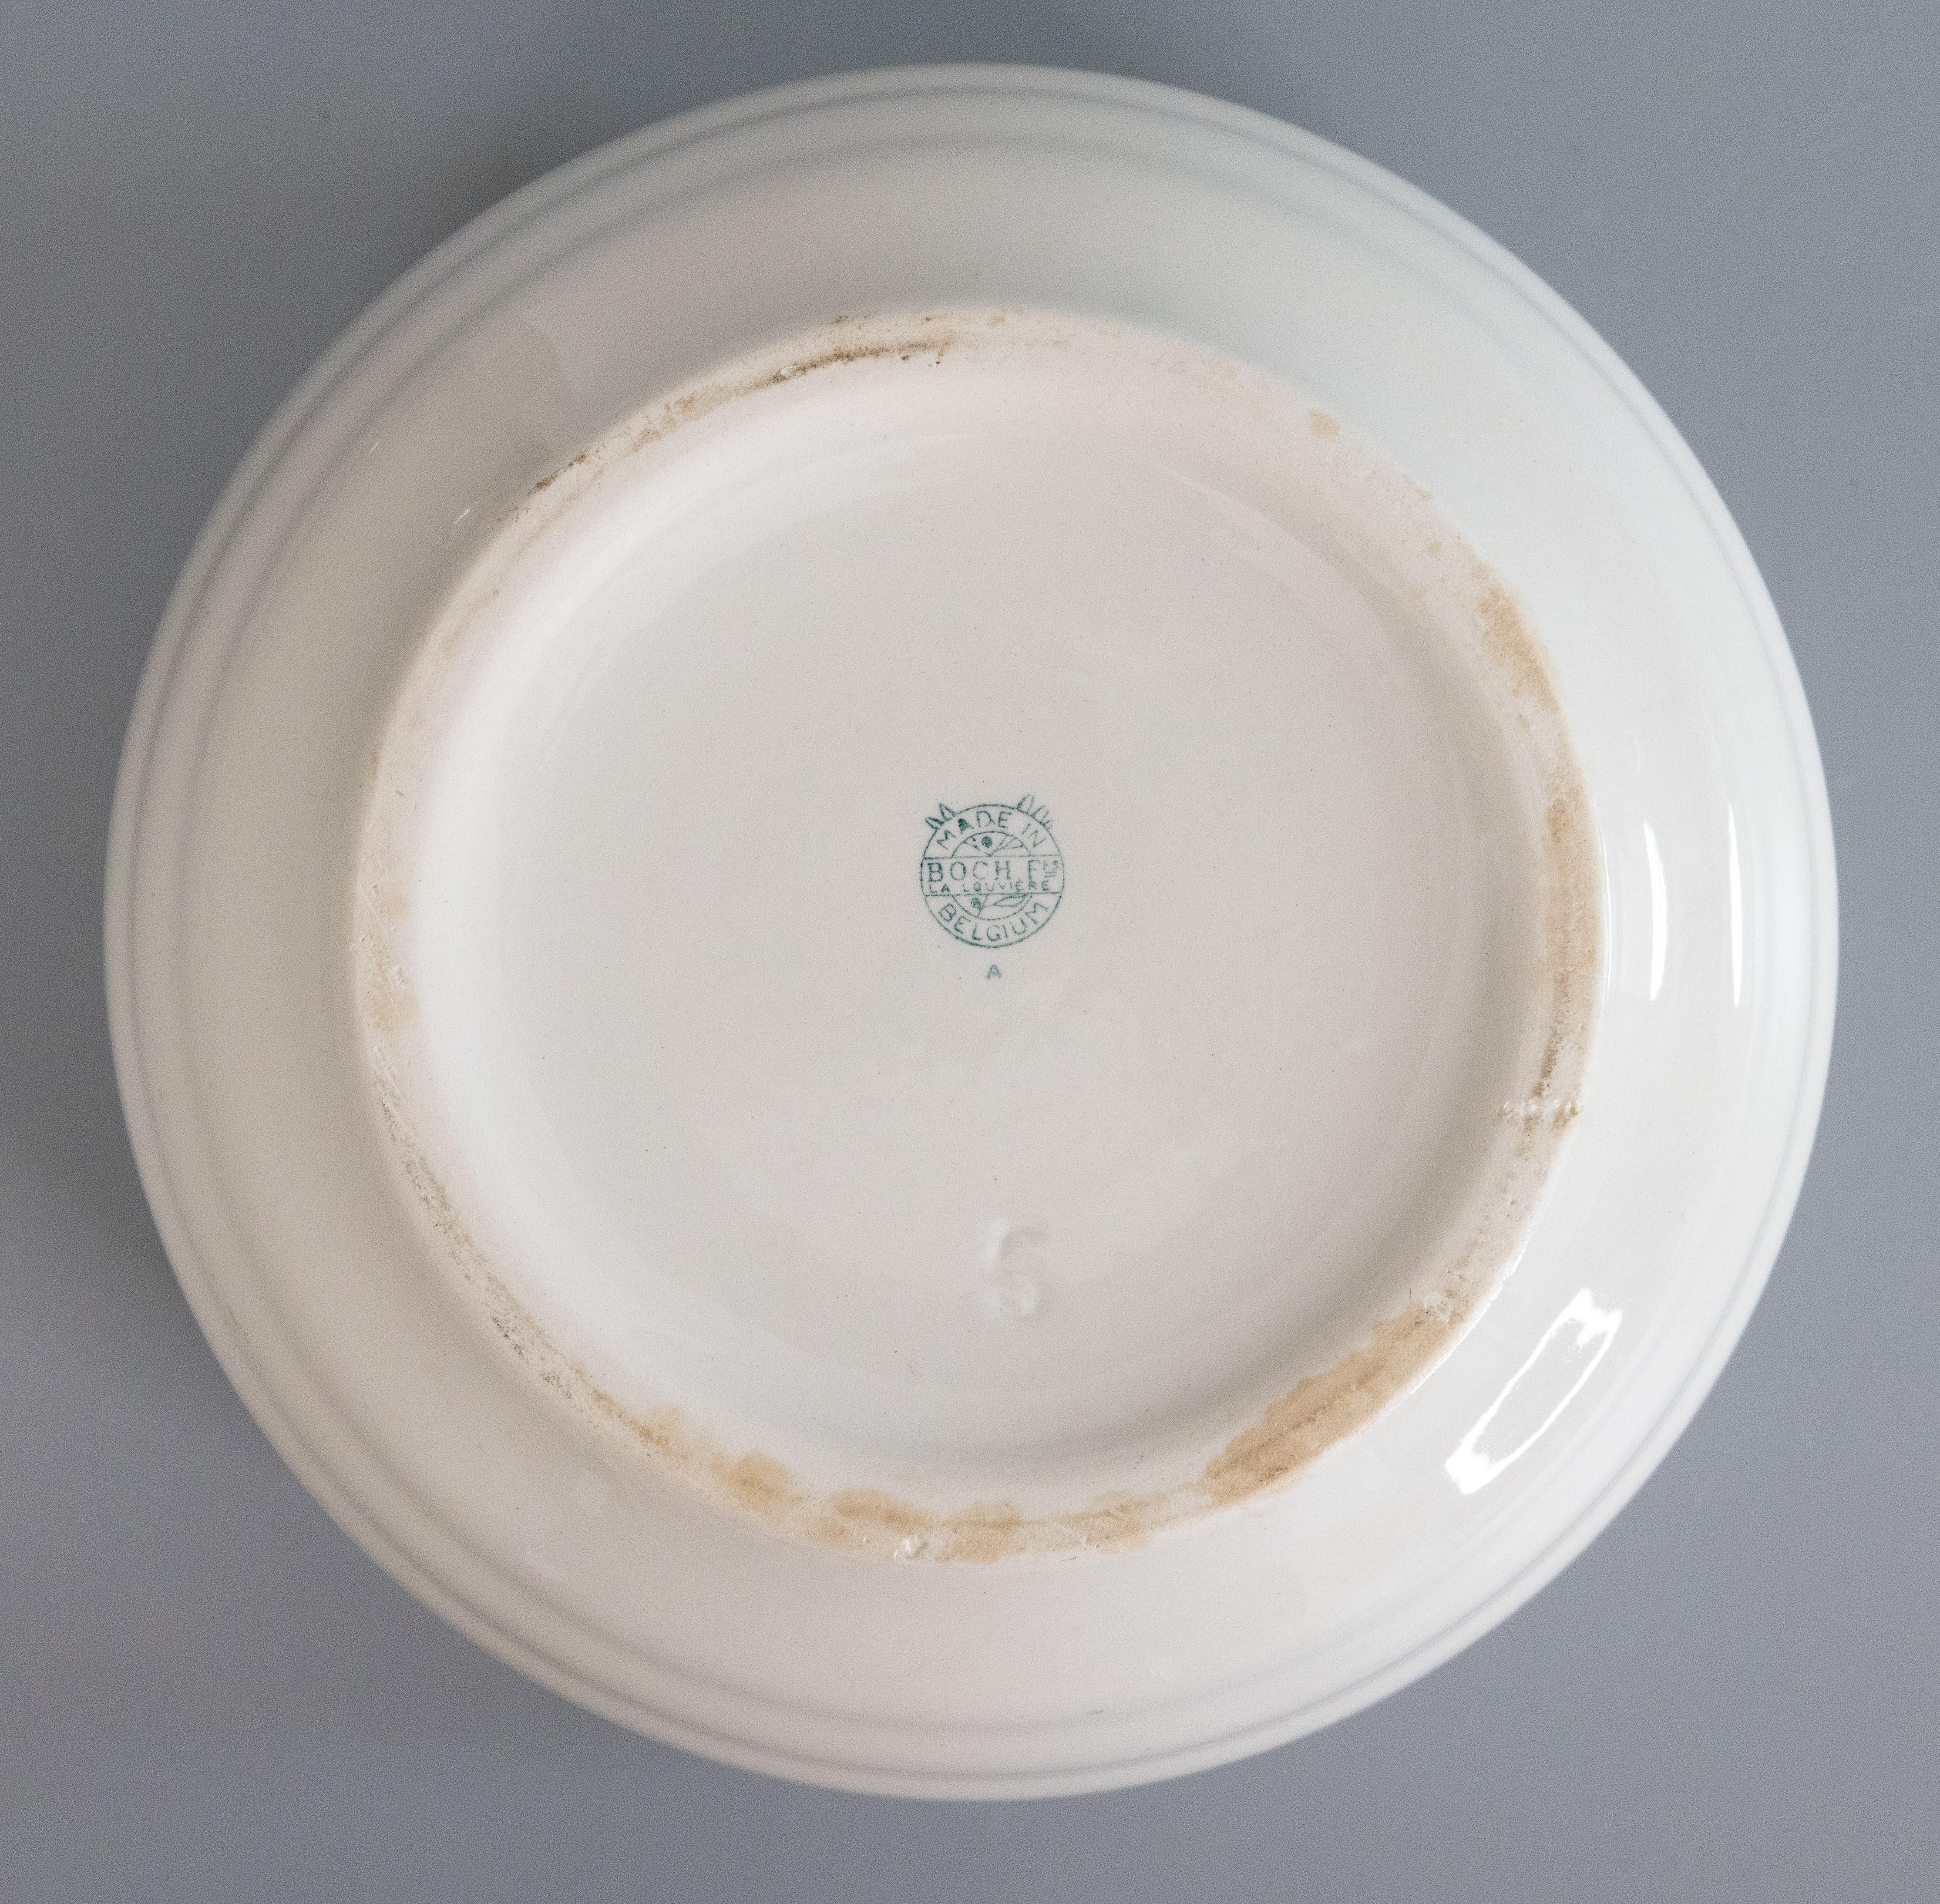 Antique White Ironstone Bowl from Boch Frères La Louvière, Belgium, circa 1920 In Good Condition For Sale In Pearland, TX